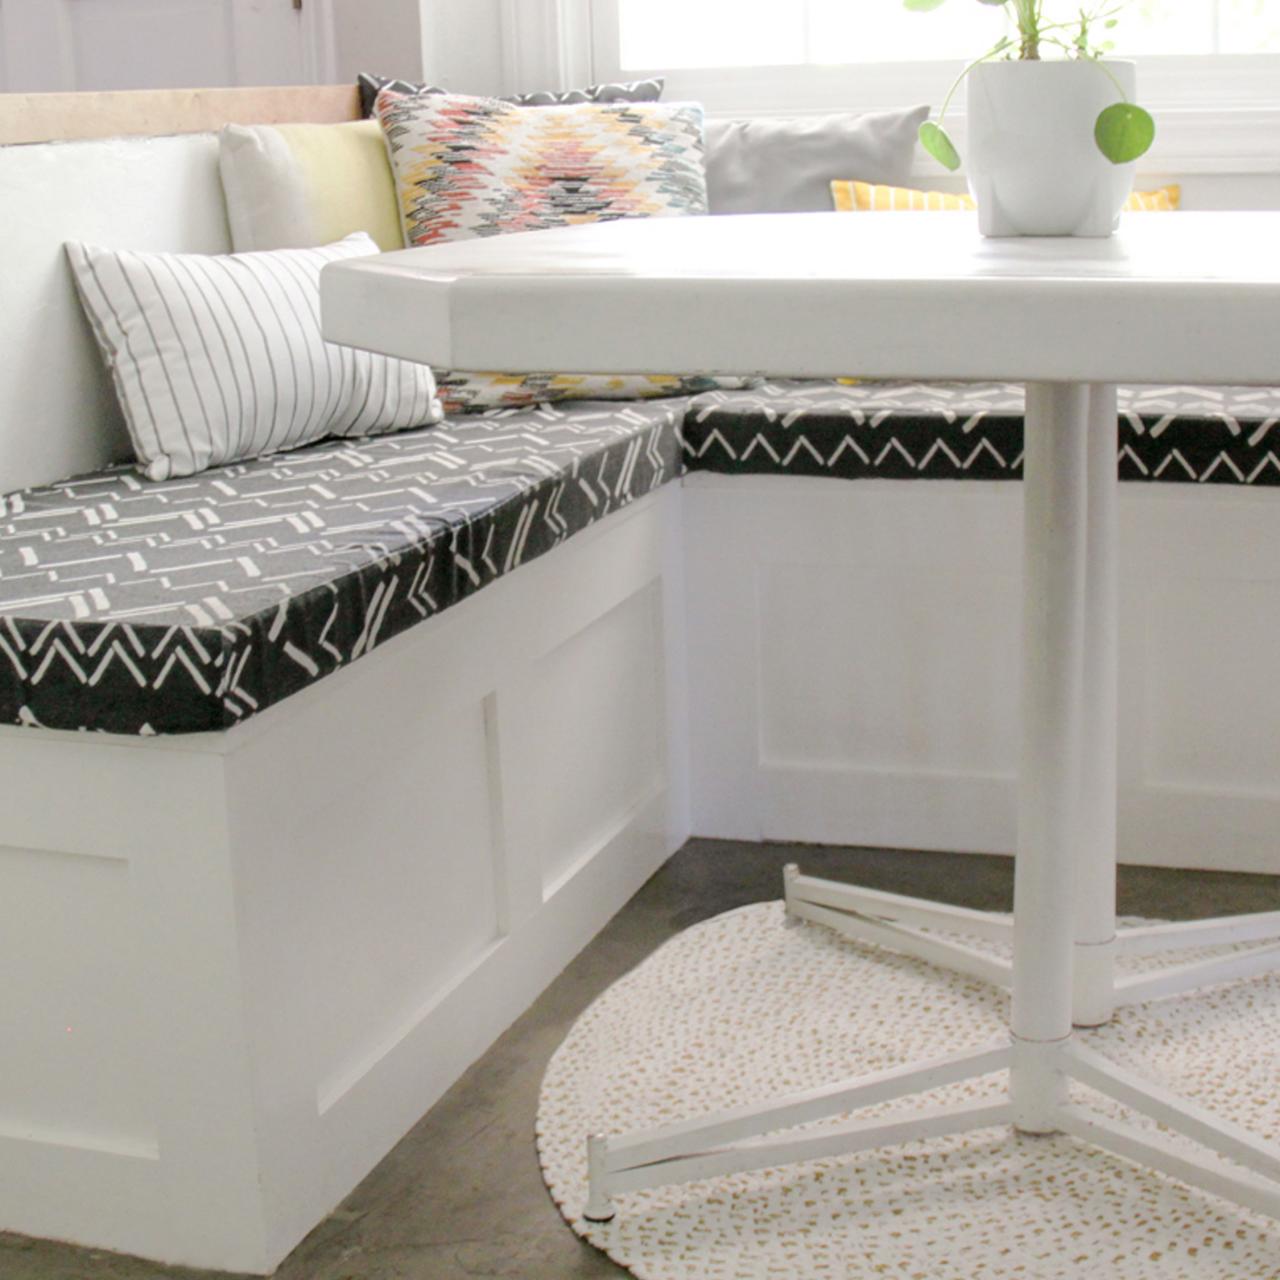 Build Your Own - Shelter Storage Banquette